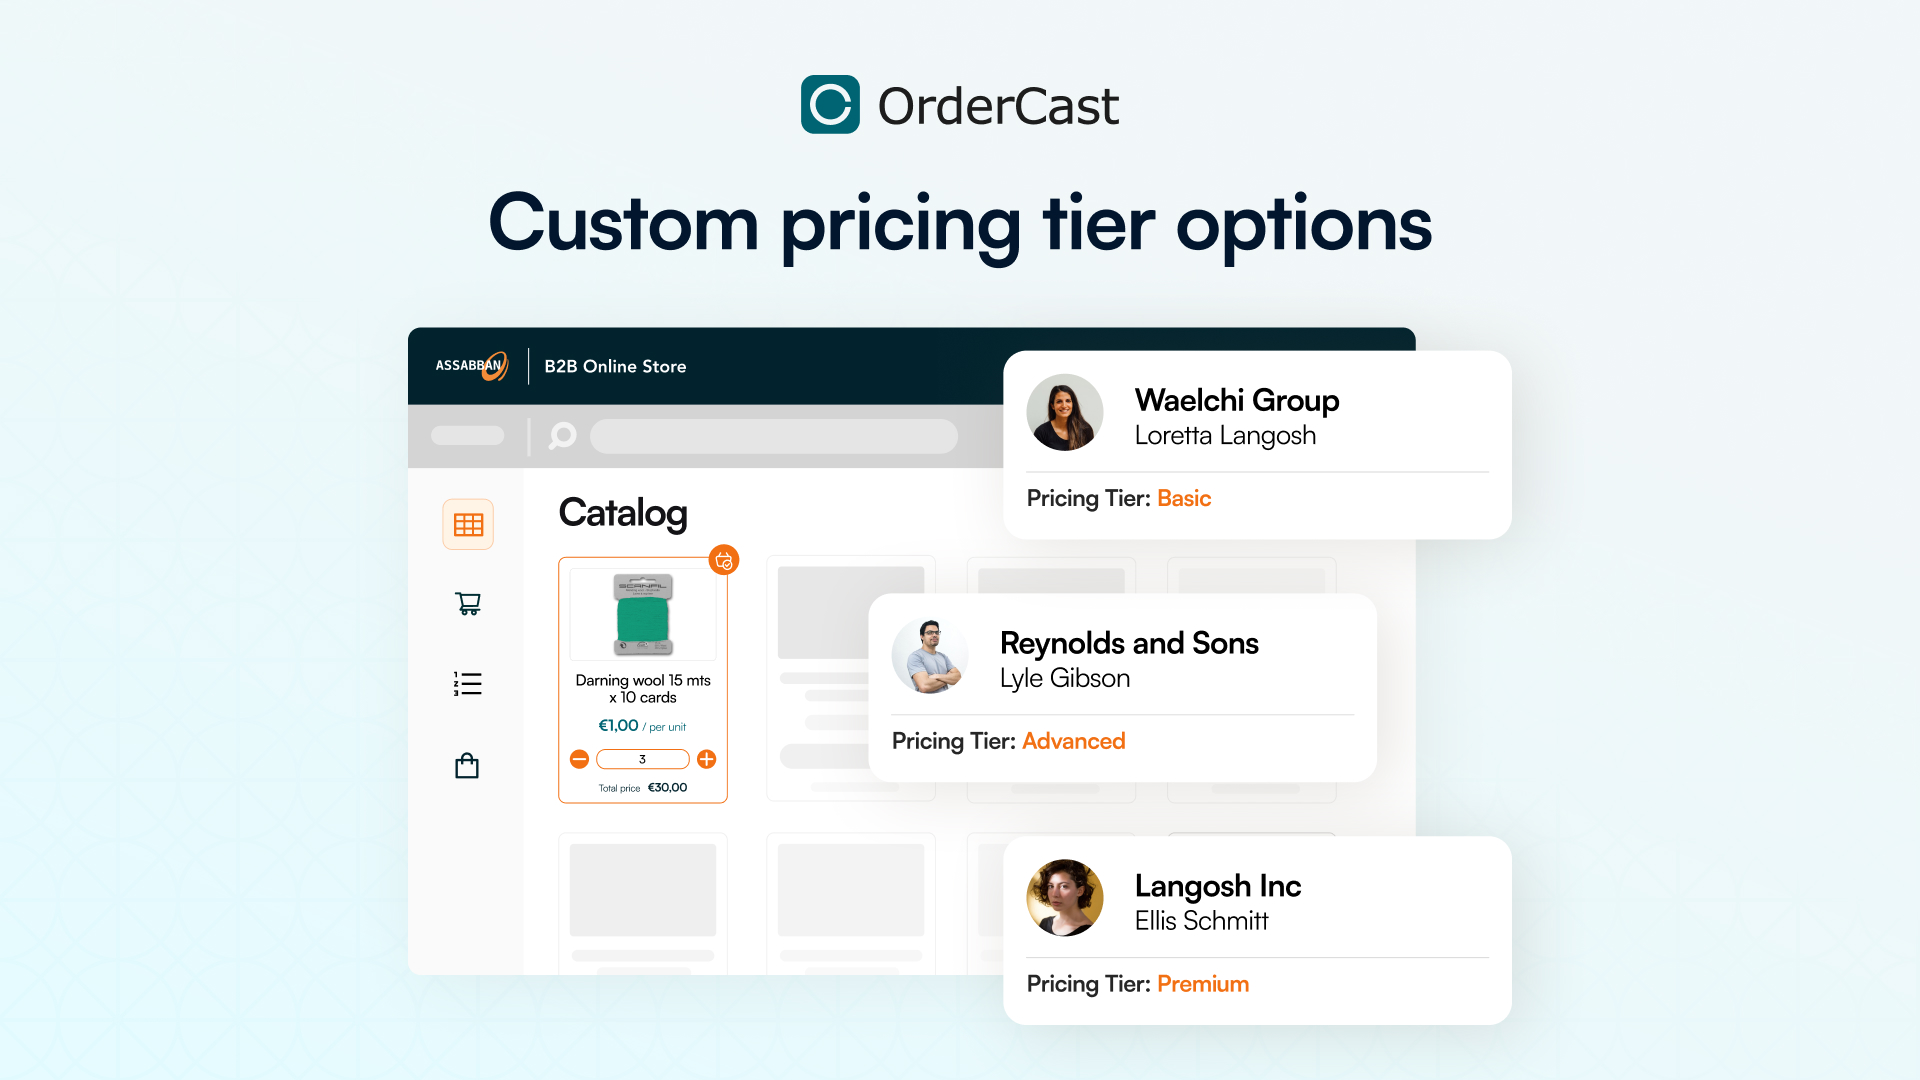 Customer pricing tier options by OrderCast